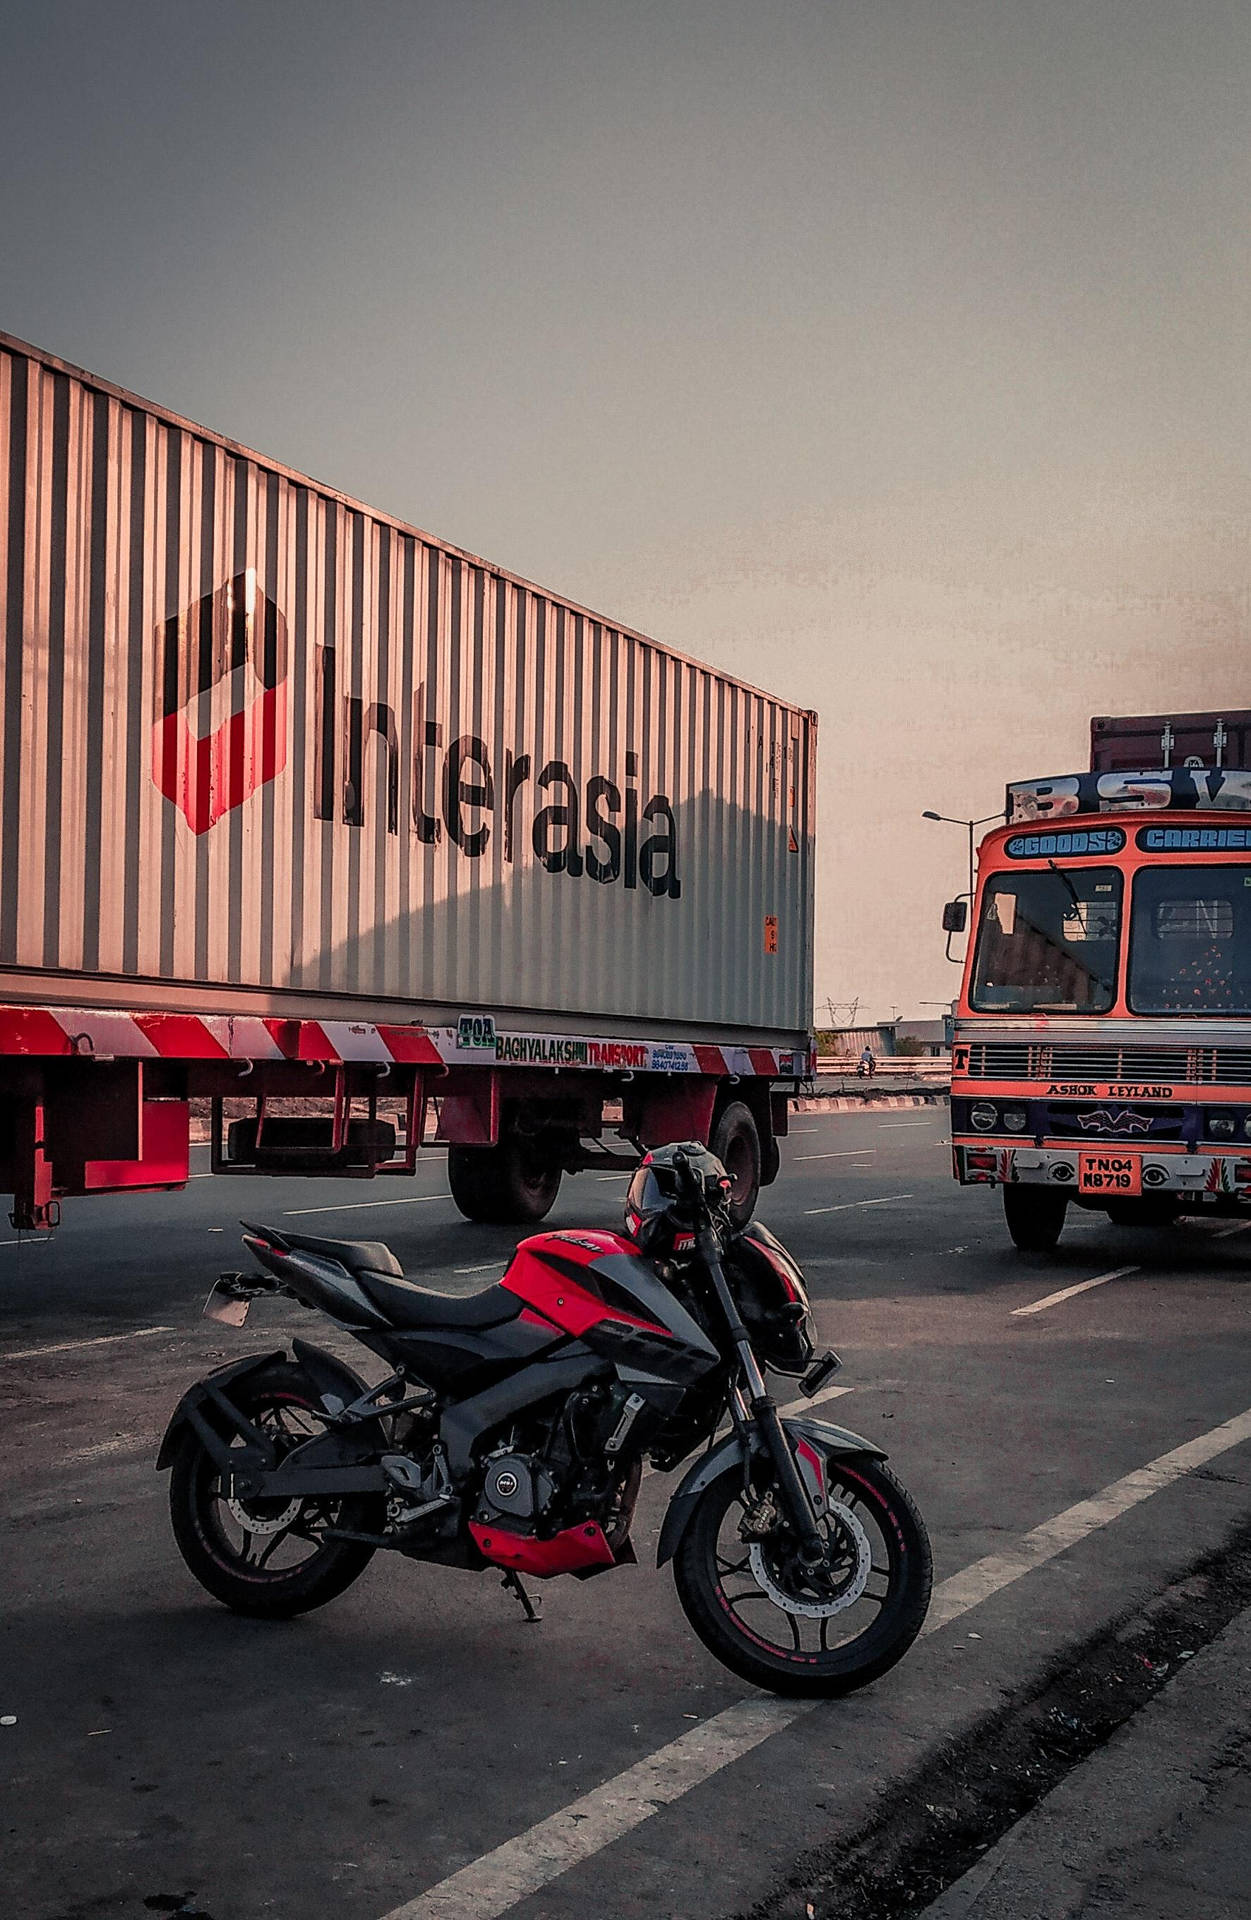 Ns 200 Black And Red Motorcycle Near Truck Background